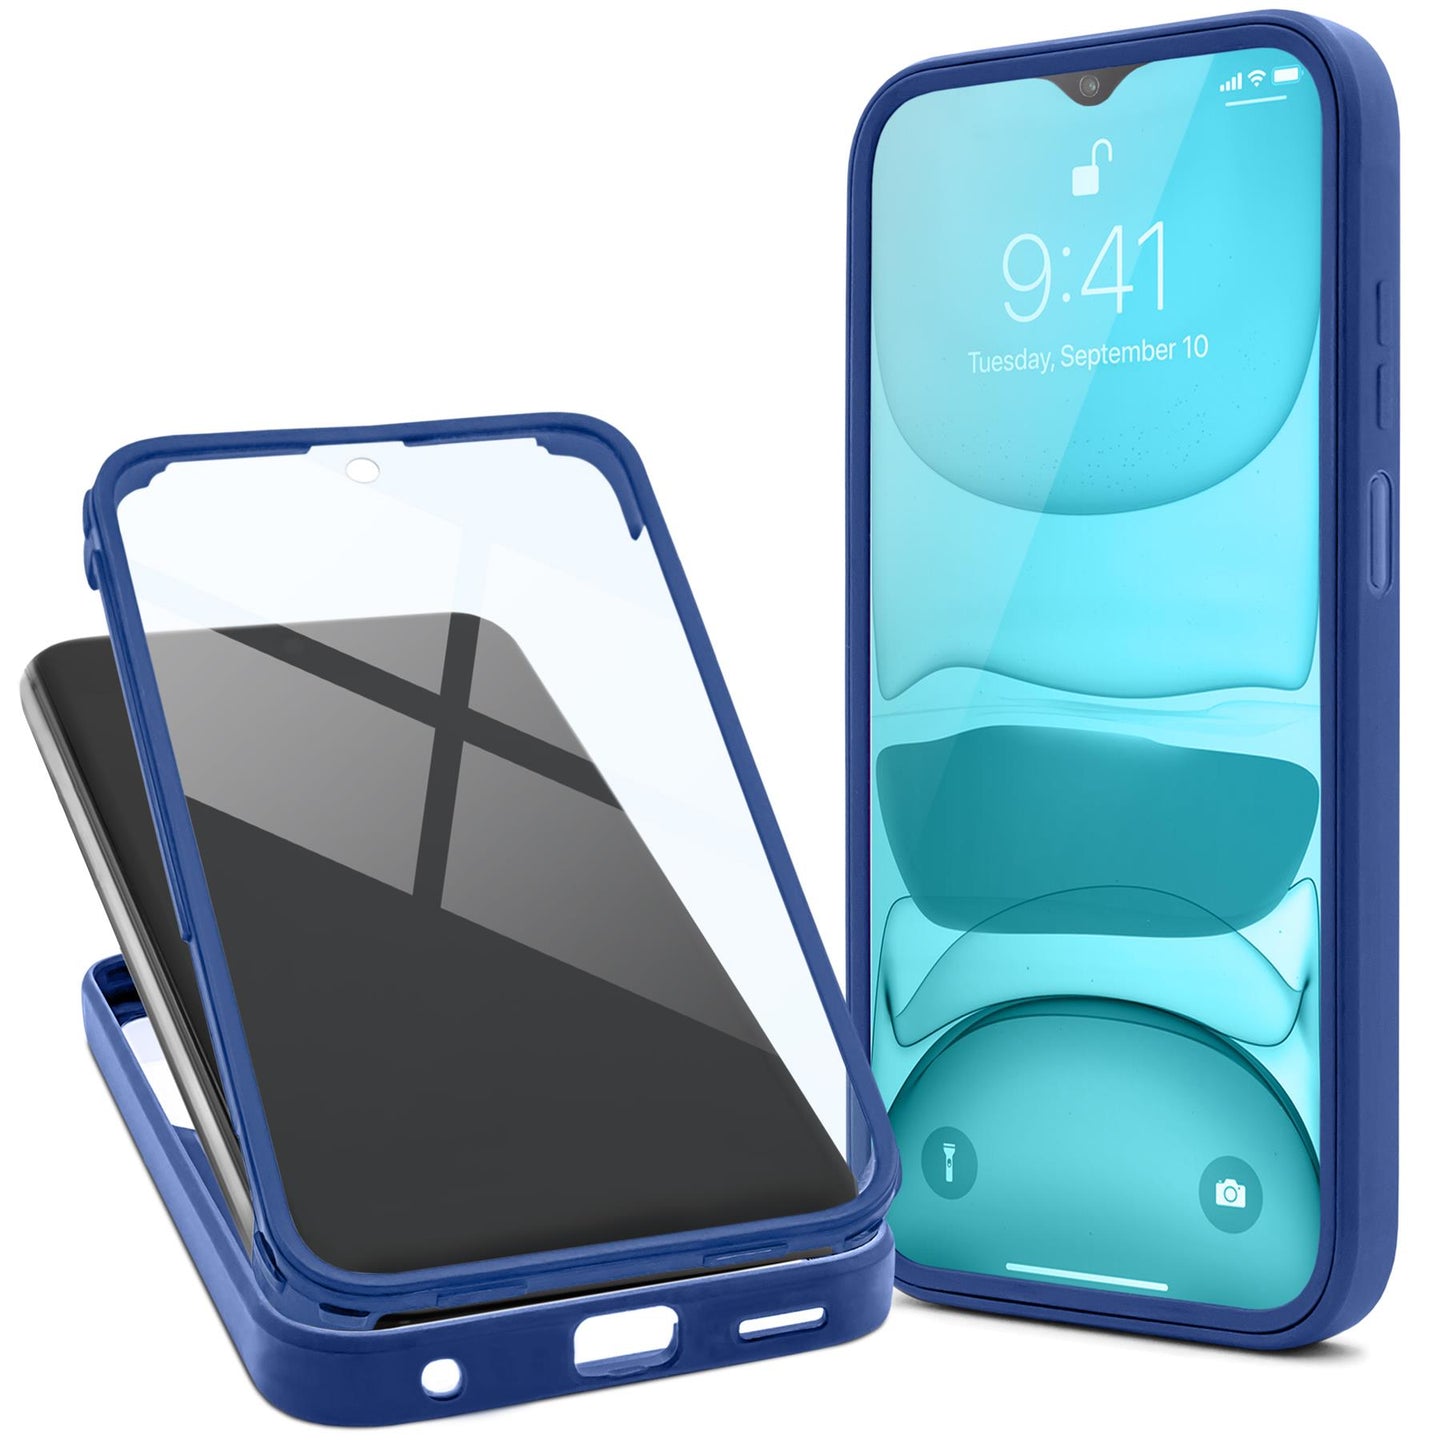 Moozy 360 Case for Samsung A13 - Blue Rim Transparent Case, Full Body Double-sided Protection, Cover with Built-in Screen Protector